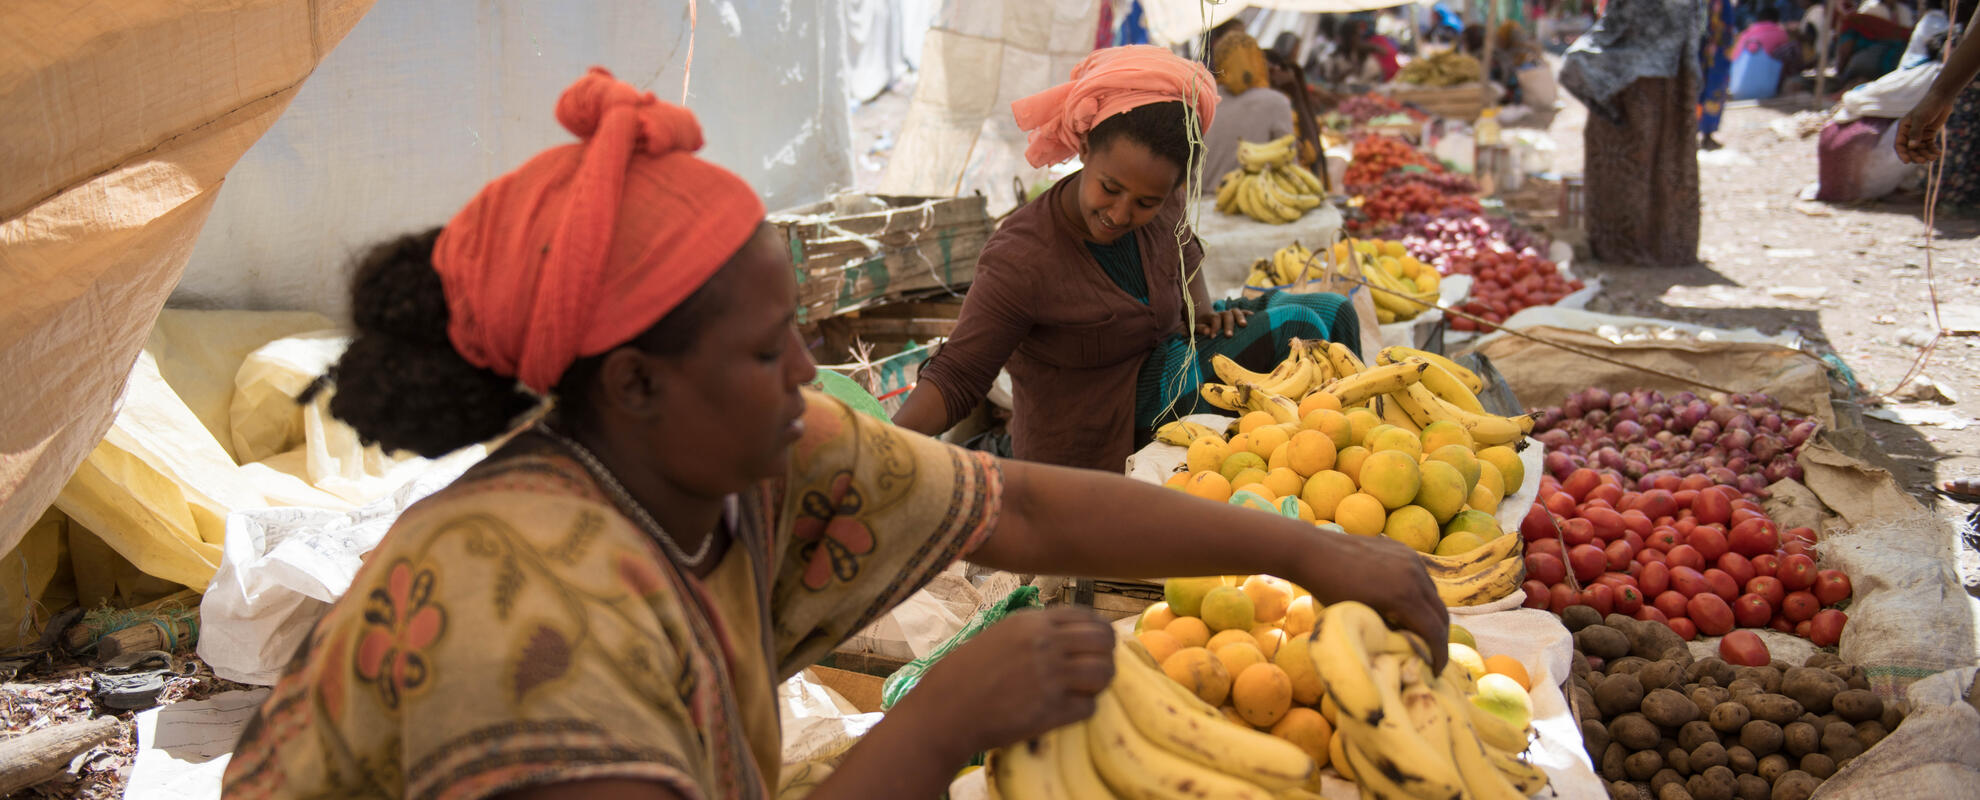 Women in the market (fruit products)